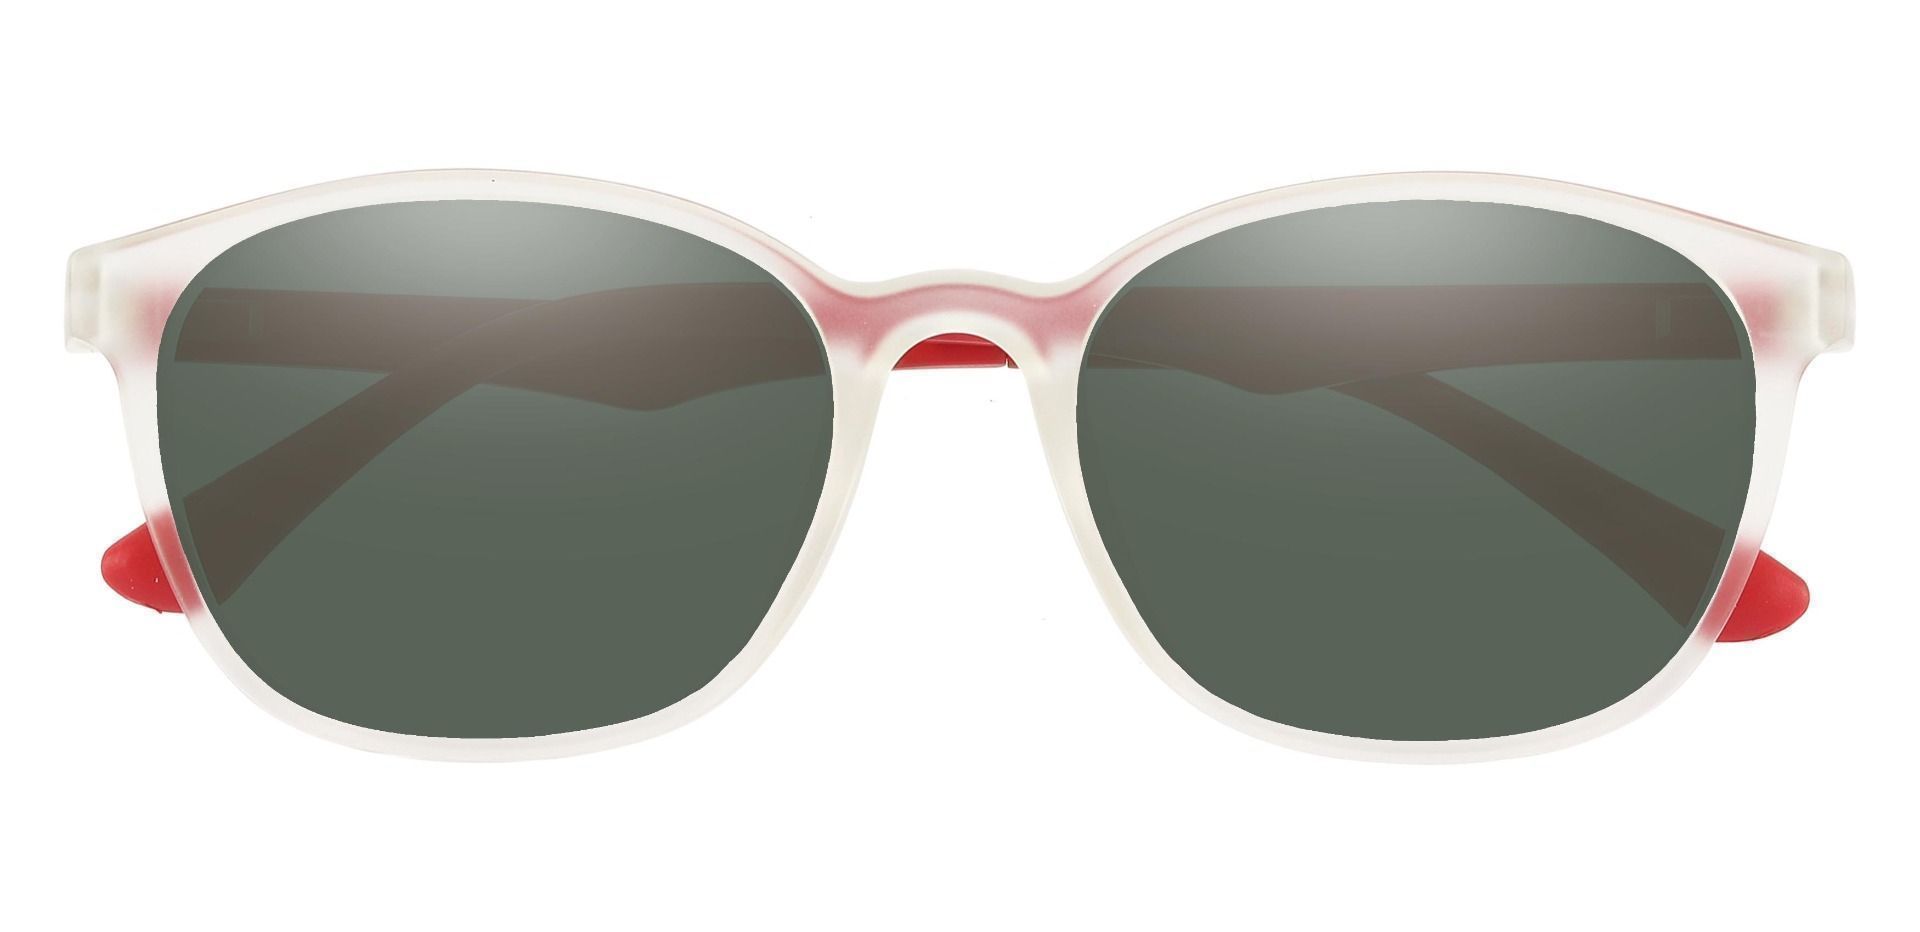 Ursula Oval Lined Bifocal Sunglasses - Matte Clear Frame With Green Lenses